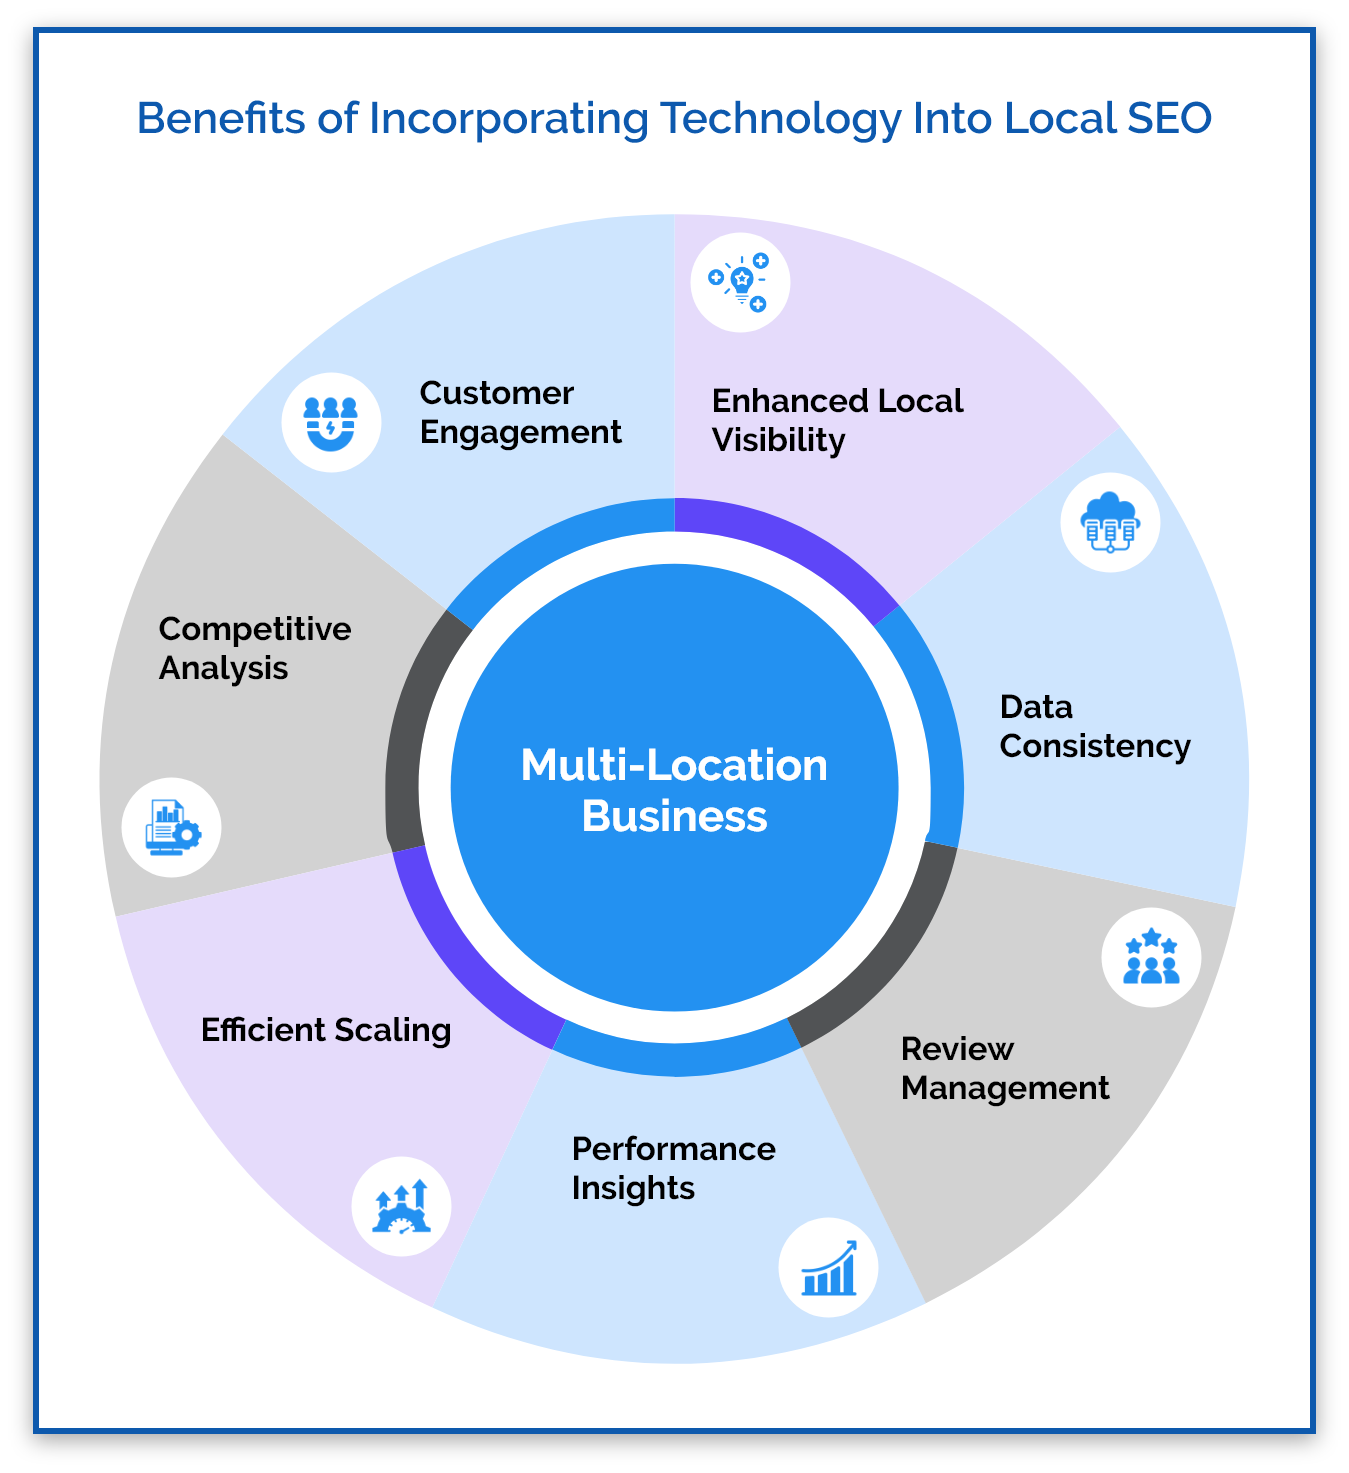 Benefits of Incorporating Technology Into Local SEO